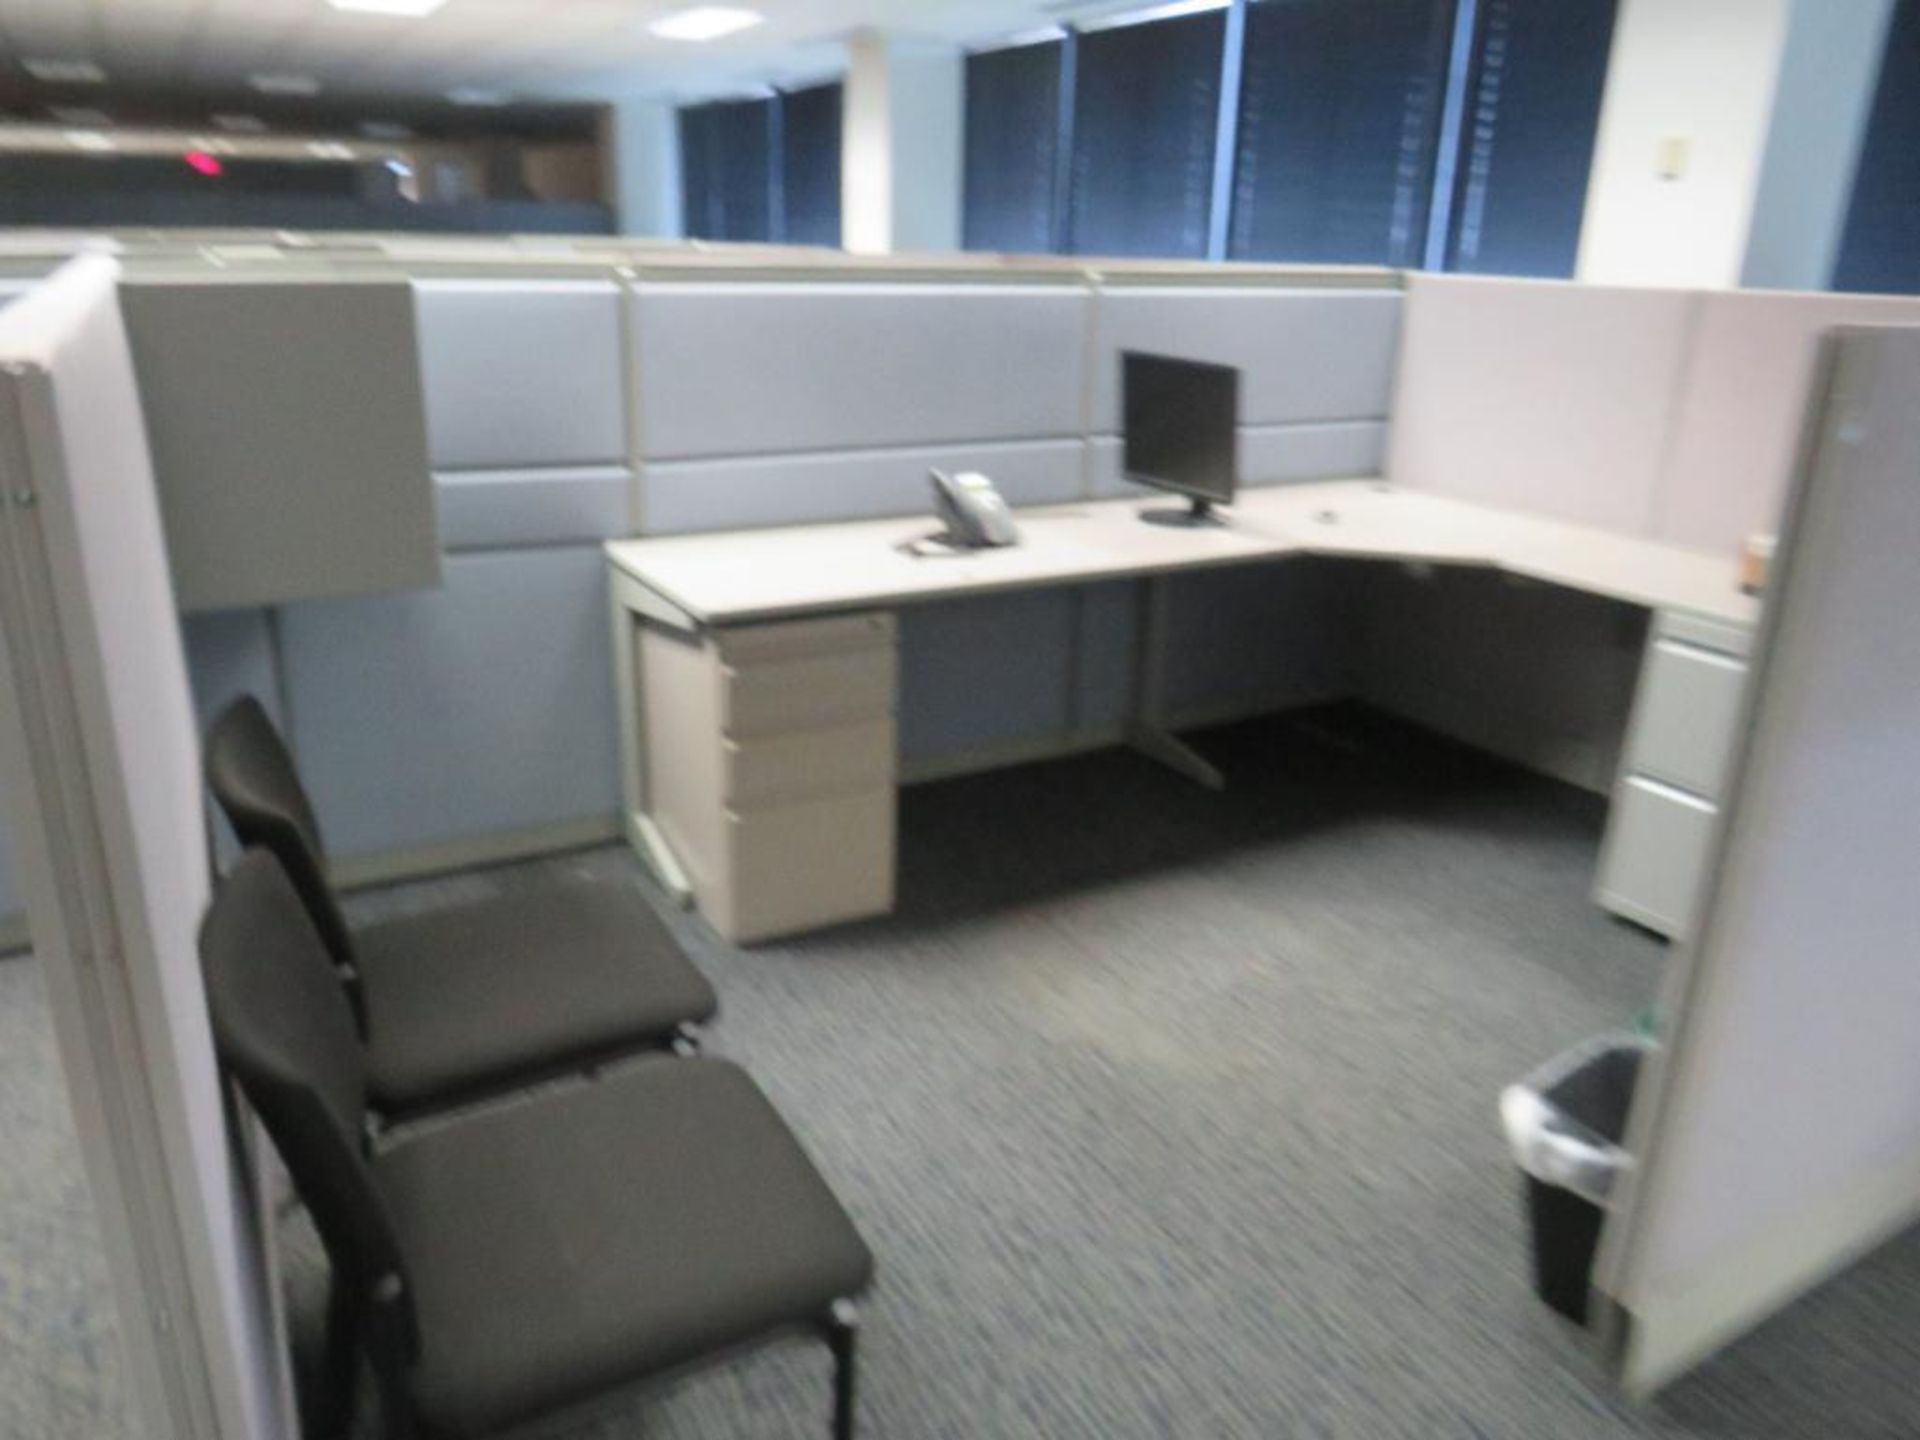 Lot c/o: Appx 6,400 Sq Ft of Cubicles (4000 Sq Ft of 67" High & 2400 Sq Ft of 53" High), Appx 57 Off - Image 12 of 23